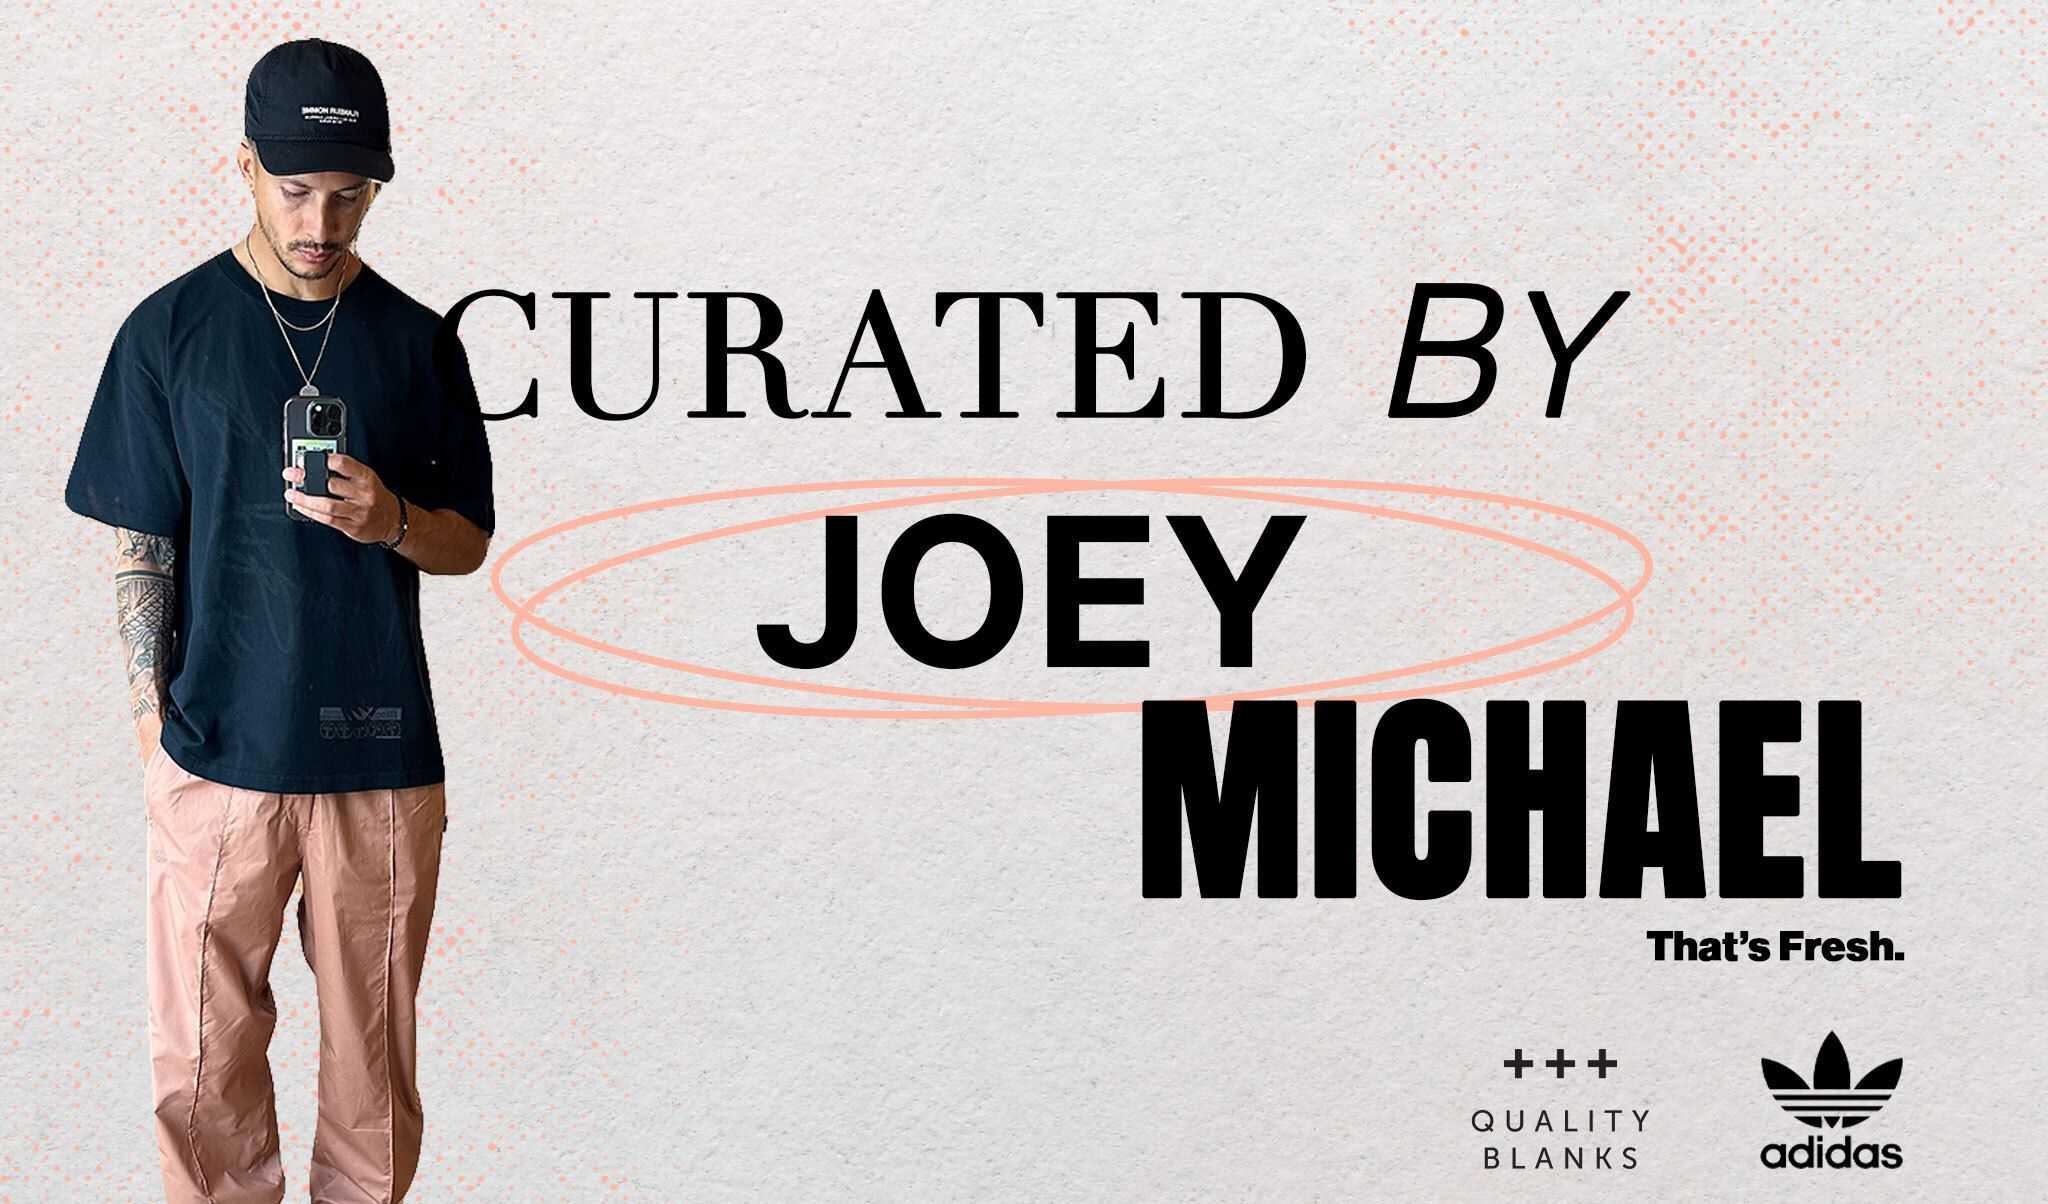 Curated by Joey Michael